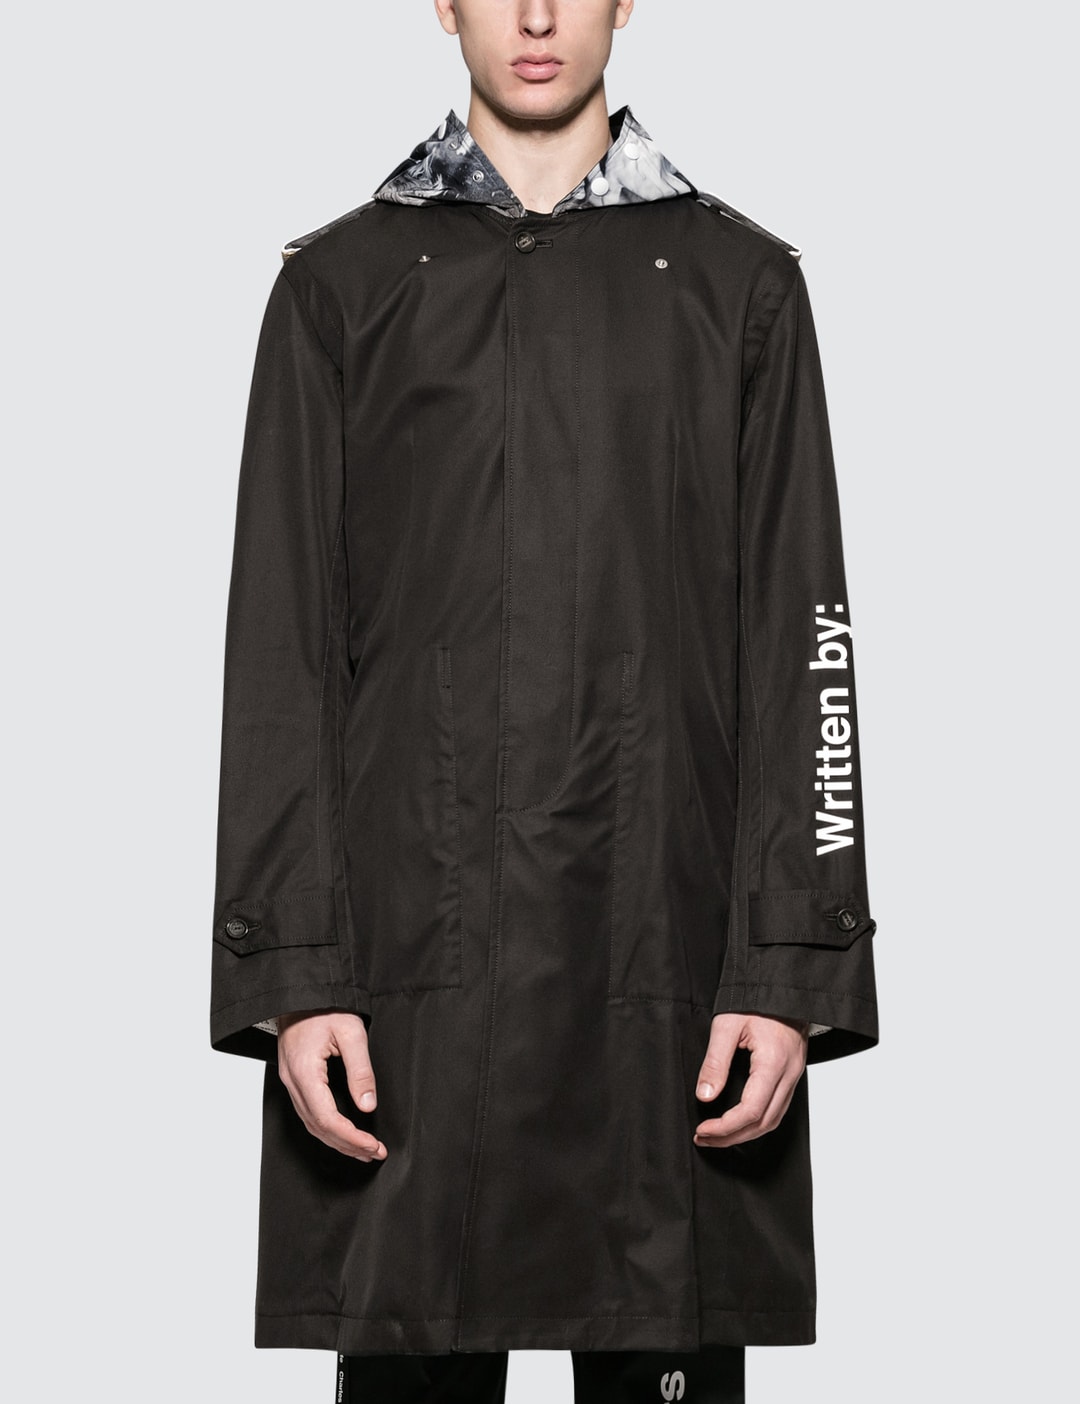 Wrapped Collar Rain Coat Placeholder Image